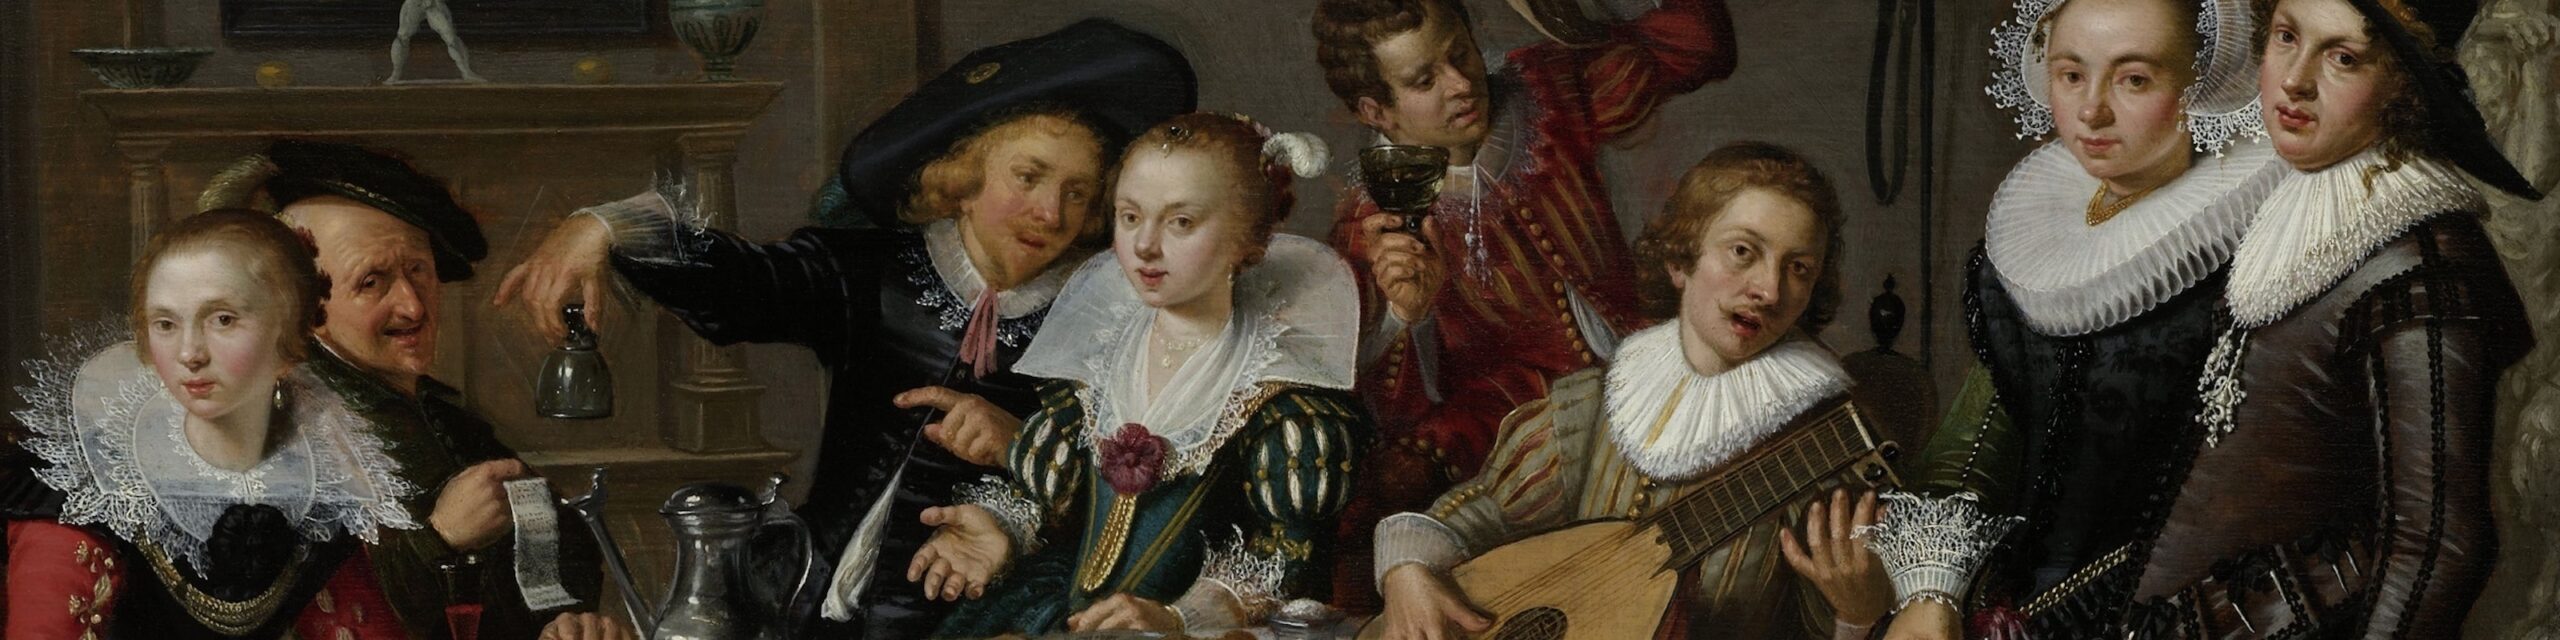 Merry Company, by Isack Elyas, 1629, Dutch painting, oil on panel. Interior with partying, drinking and music making company around a set table allude to the Five Senses.